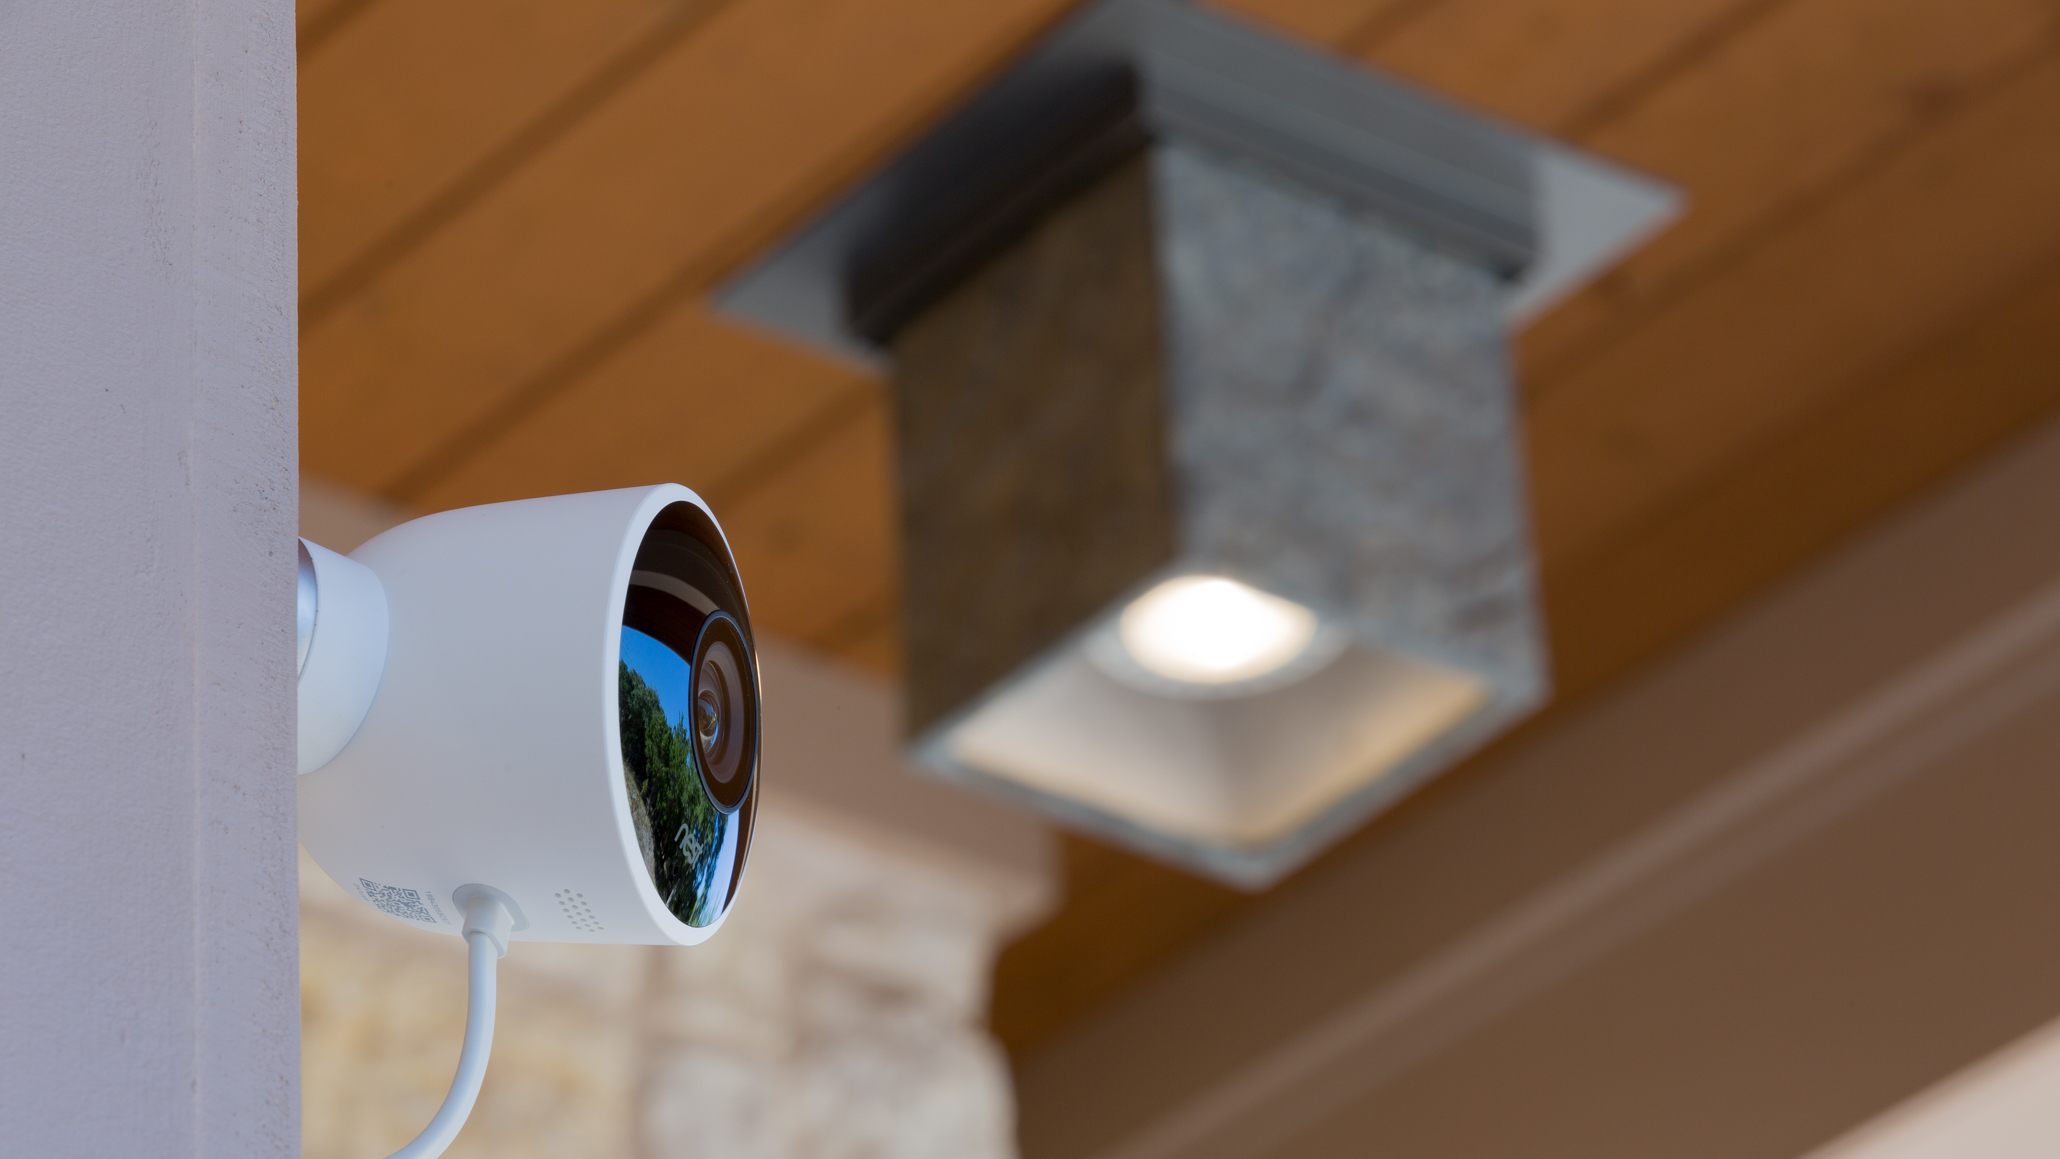 Many smart devices can help promote safety around your abode. The Nest Cam Outdoor shown here can record goings-on 7x24 and alert you to intruders. Image: Digitized House Media.